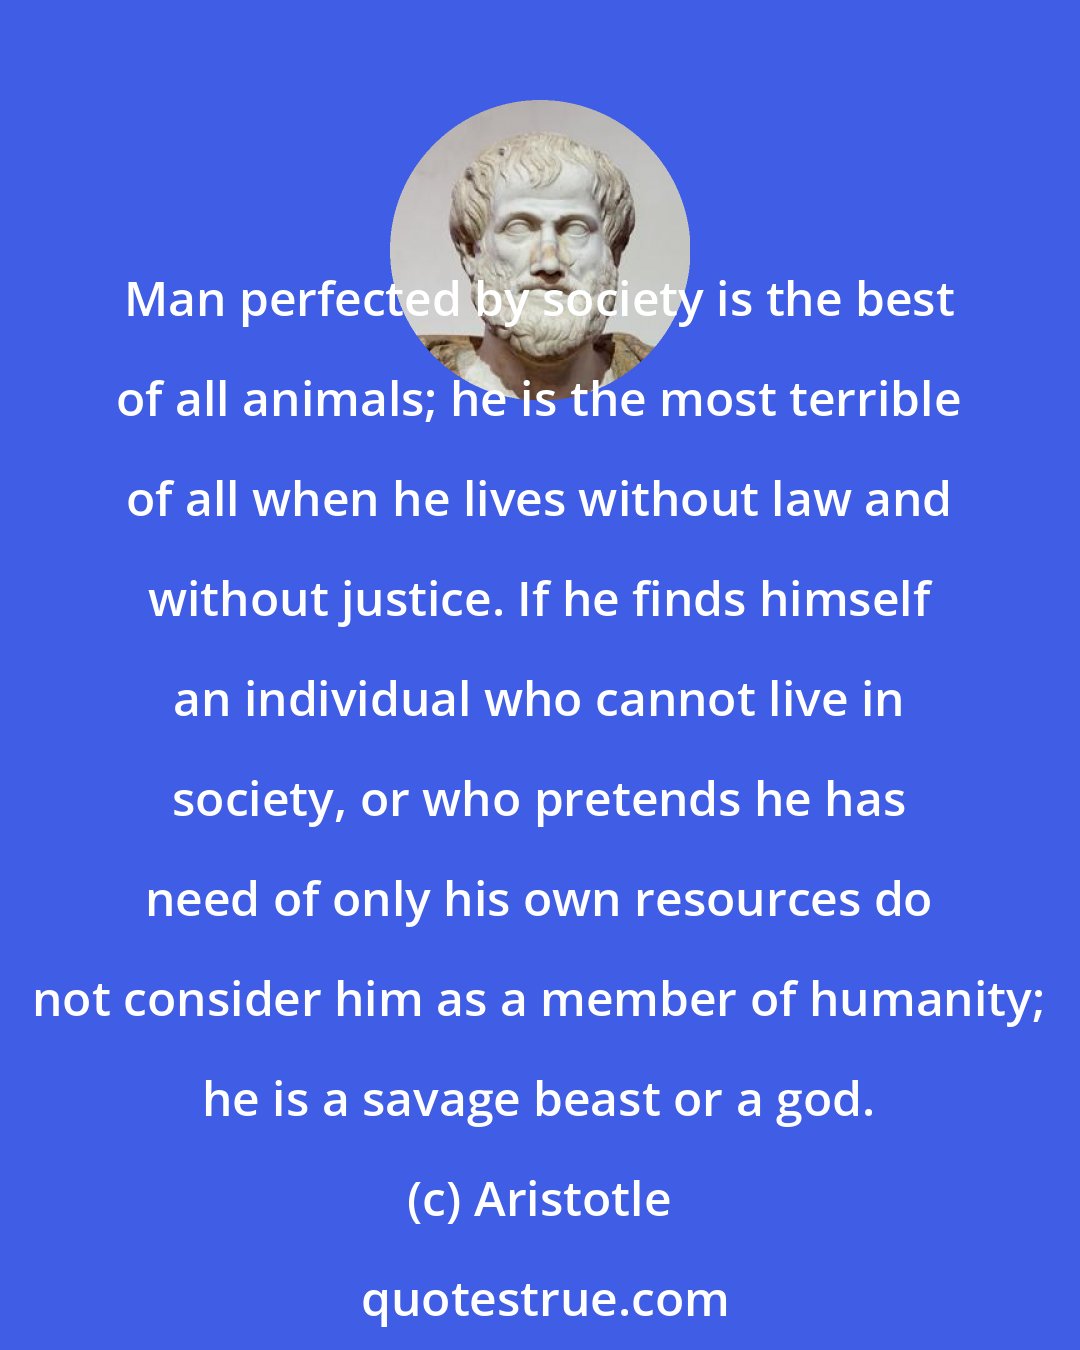 Aristotle: Man perfected by society is the best of all animals; he is the most terrible of all when he lives without law and without justice. If he finds himself an individual who cannot live in society, or who pretends he has need of only his own resources do not consider him as a member of humanity; he is a savage beast or a god.